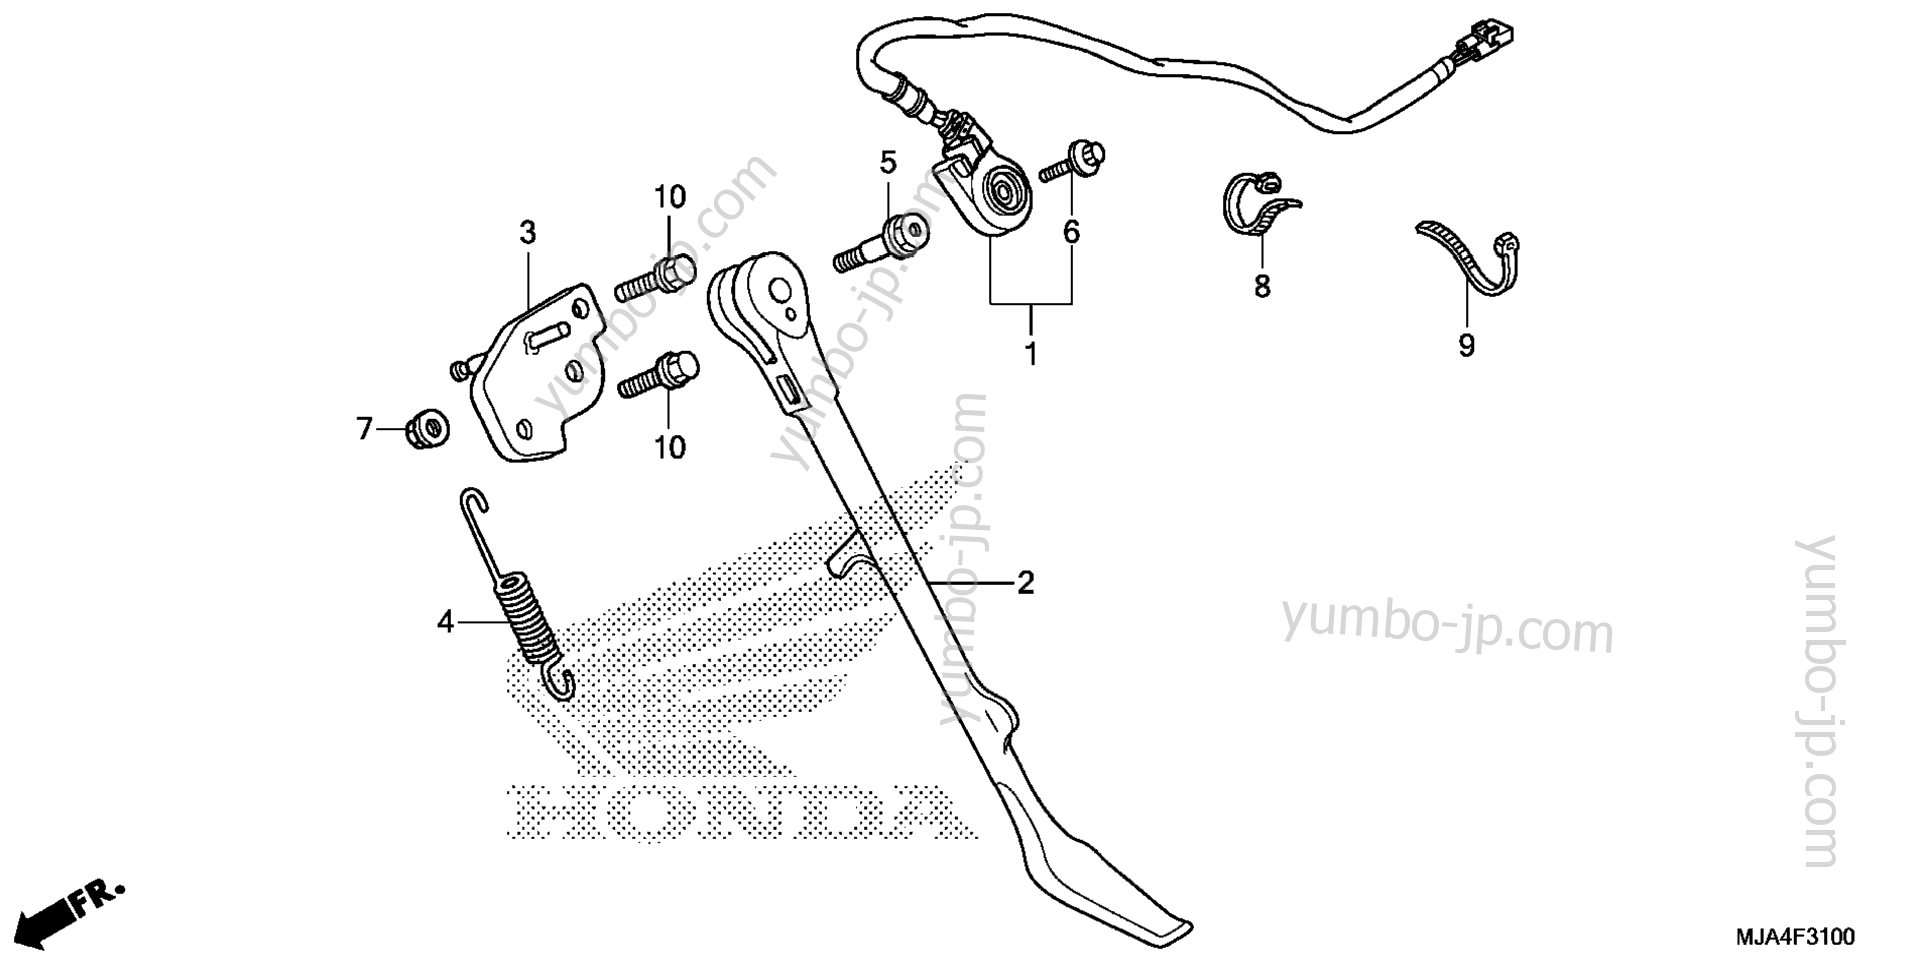 SIDE STAND (1) for motorcycles HONDA VT750C2B A 2012 year